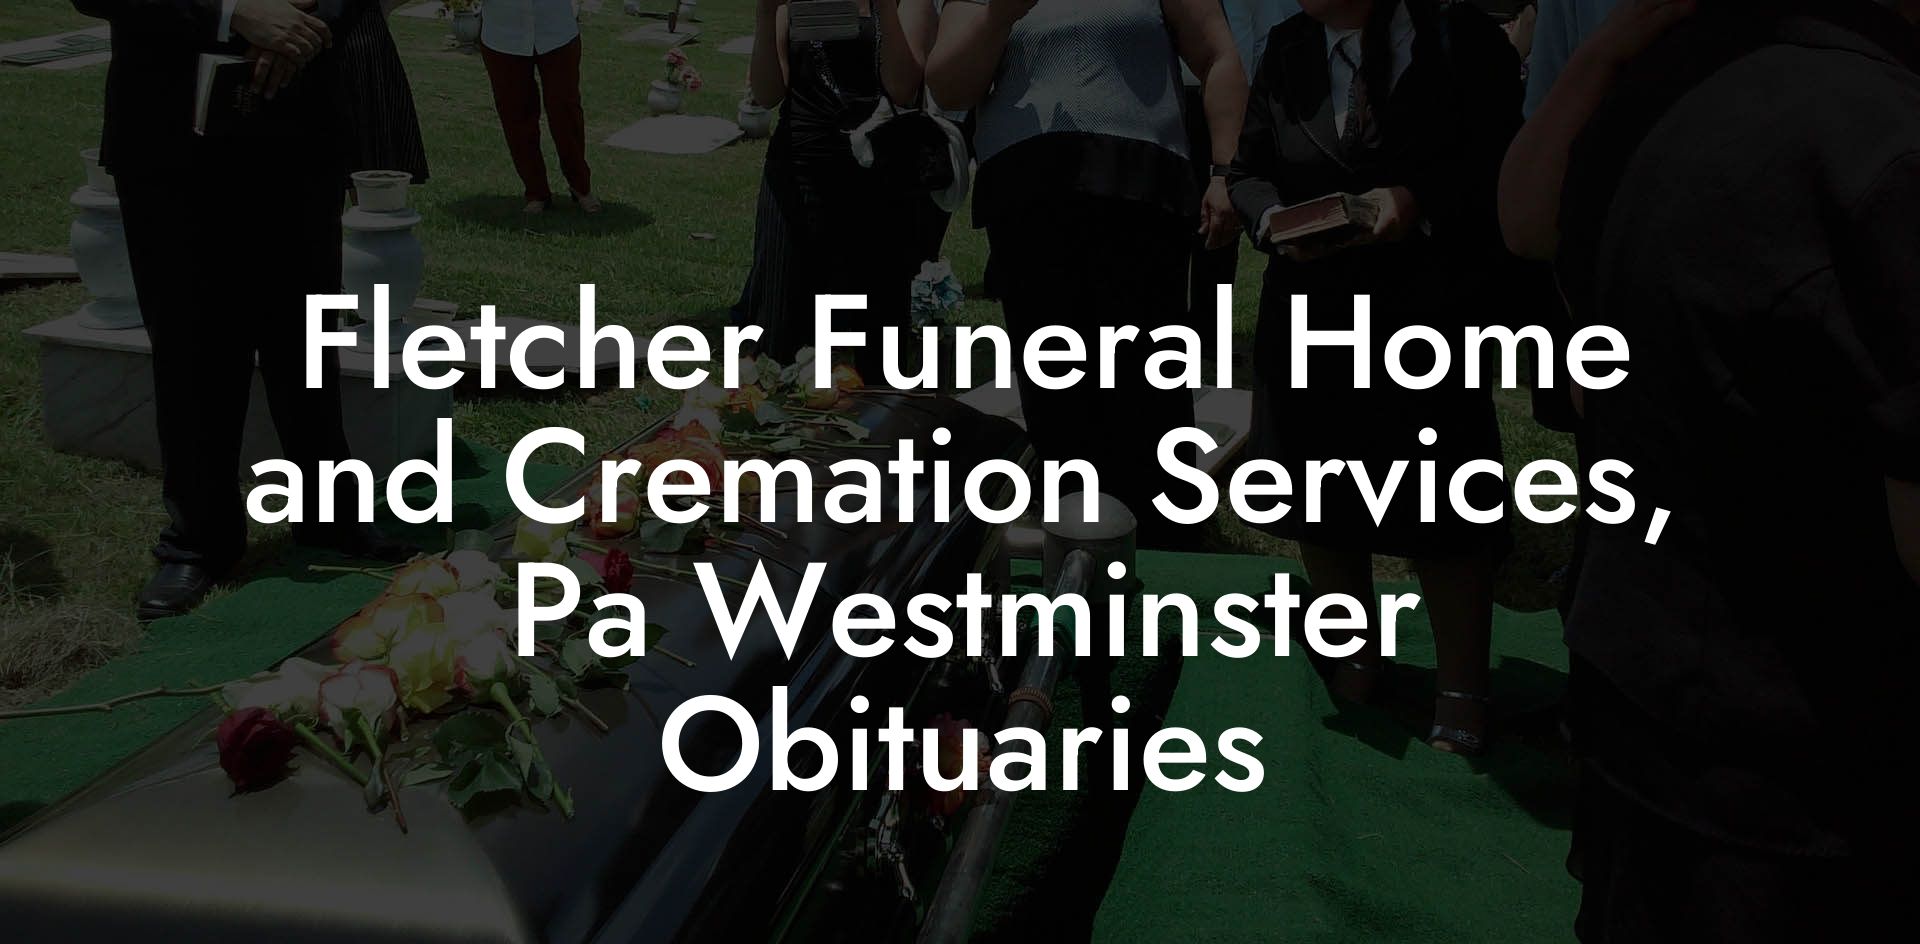 Fletcher Funeral Home and Cremation Services, Pa Westminster Obituaries